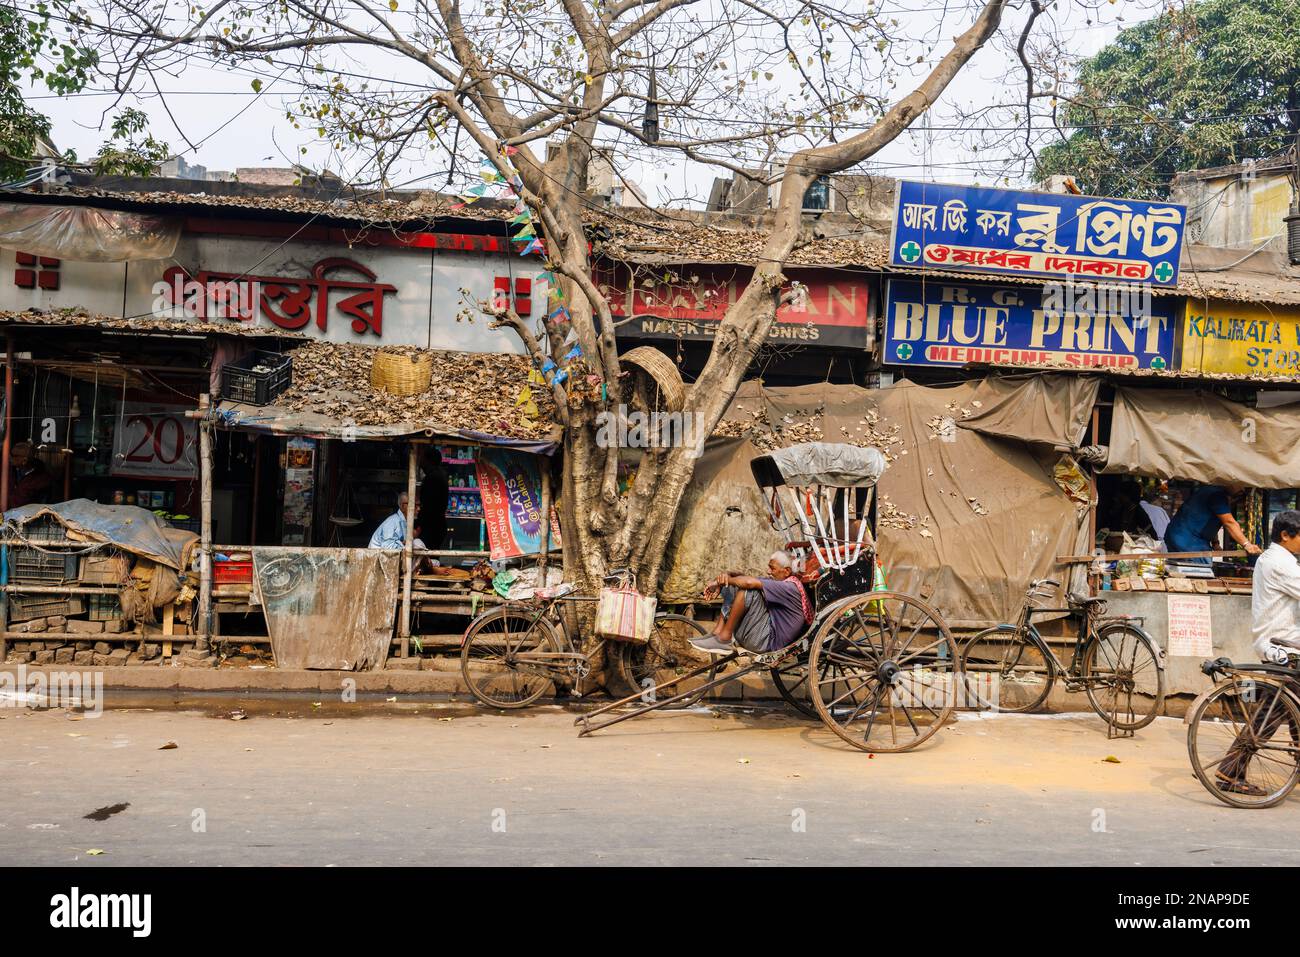 Street scene of a resting rickshaw driver, local people, shops, stalls and kiosks in Fariapukur, Shyam Bazar, a suburb of Kolkata, West Bengal, India Stock Photo